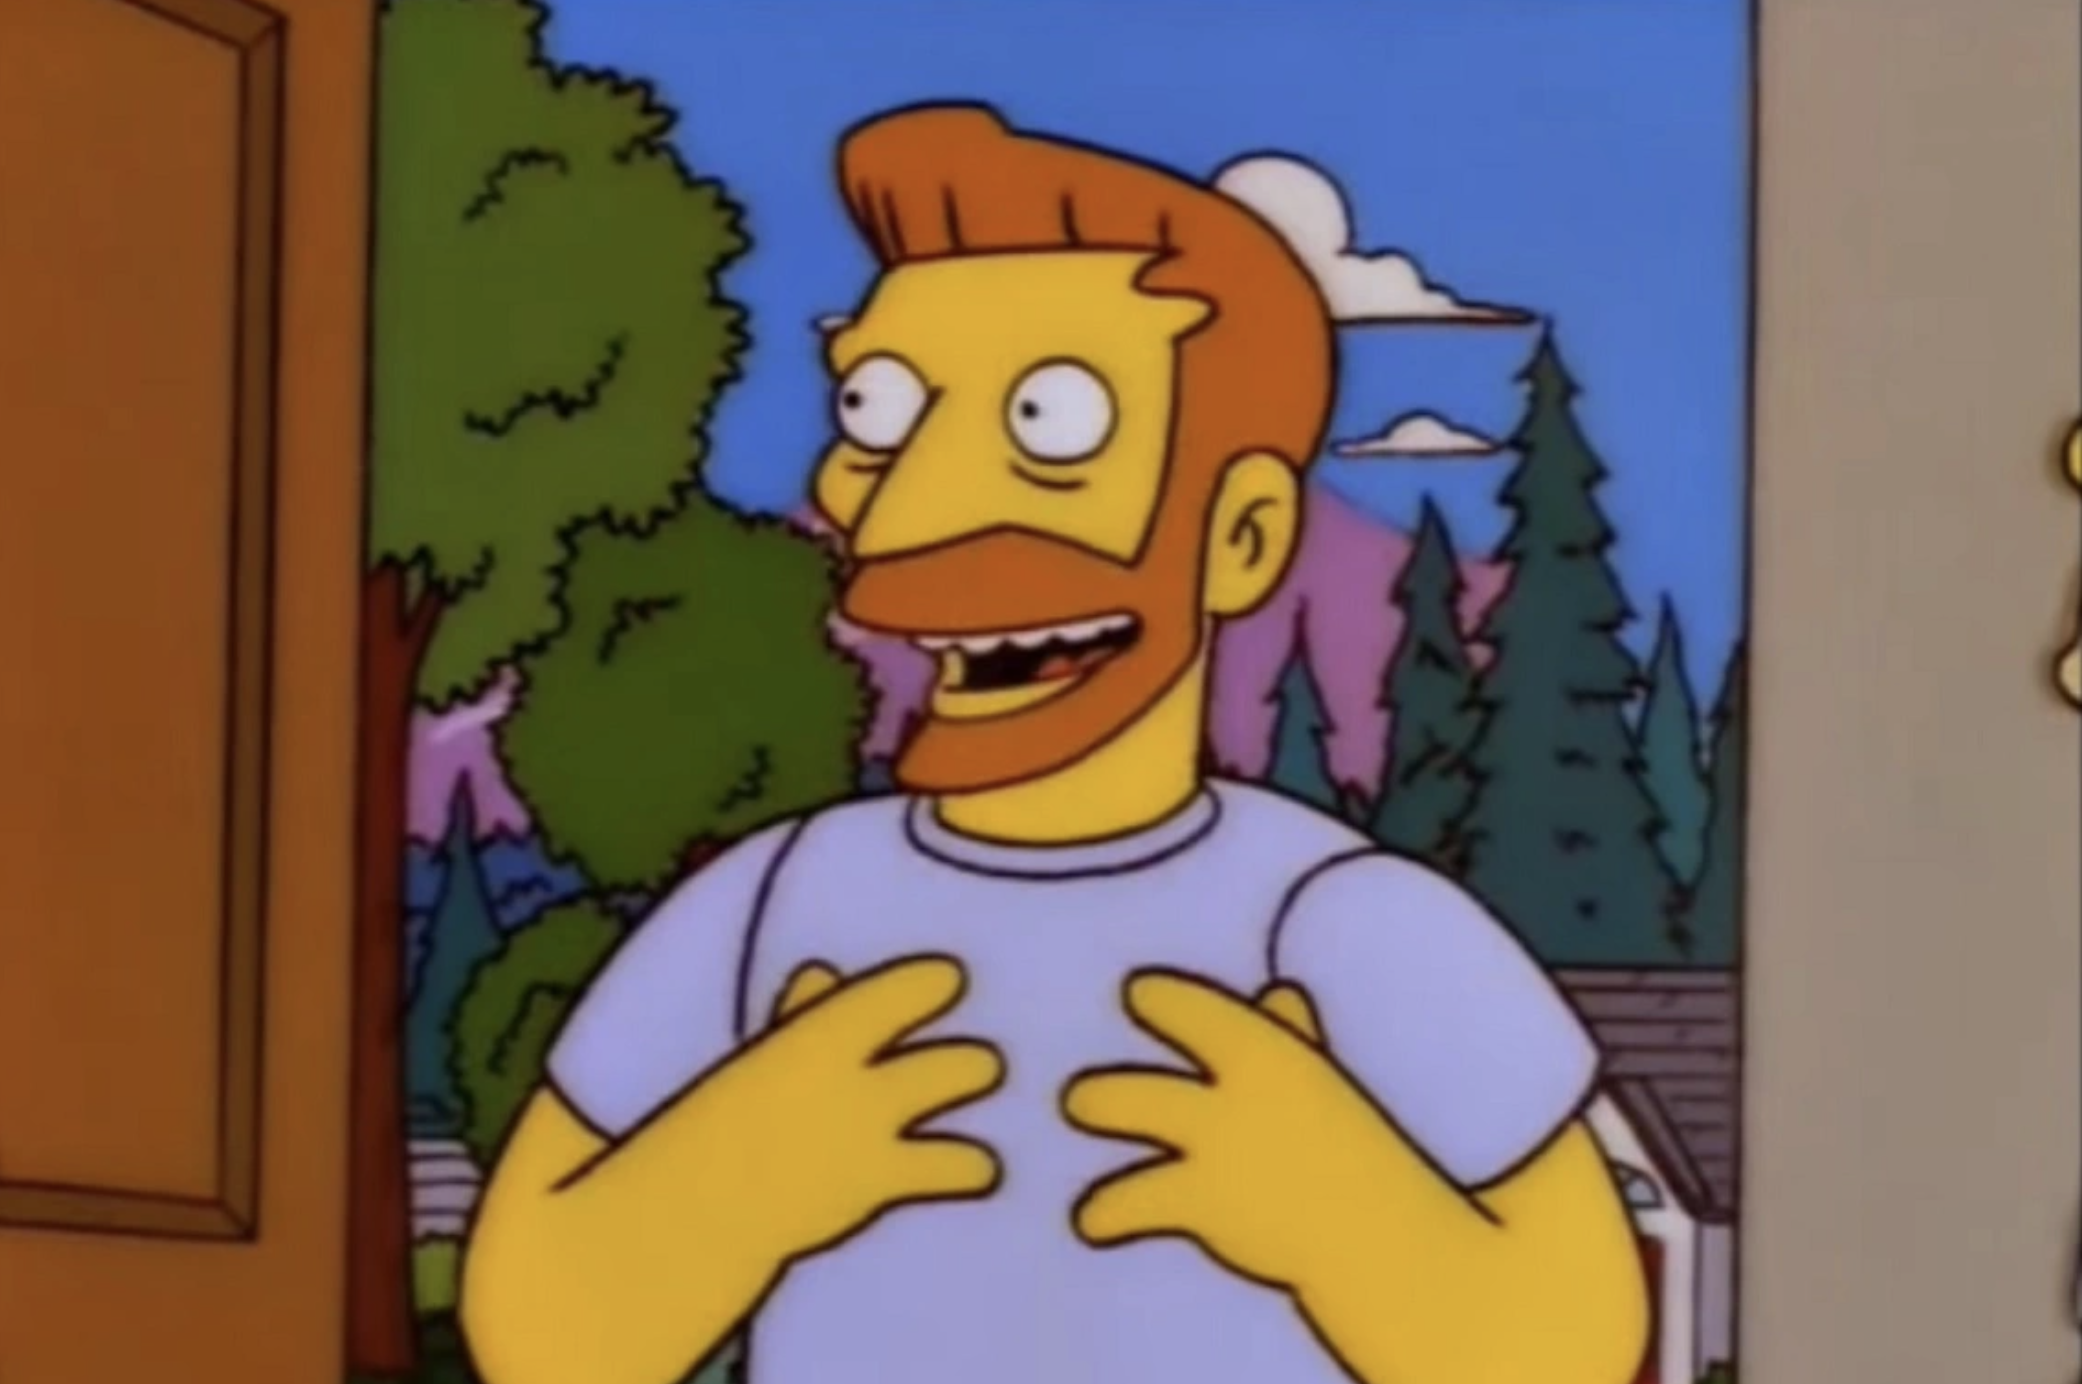 Hank Scorpio, with a red beard and hair, stands in a doorway looking excited